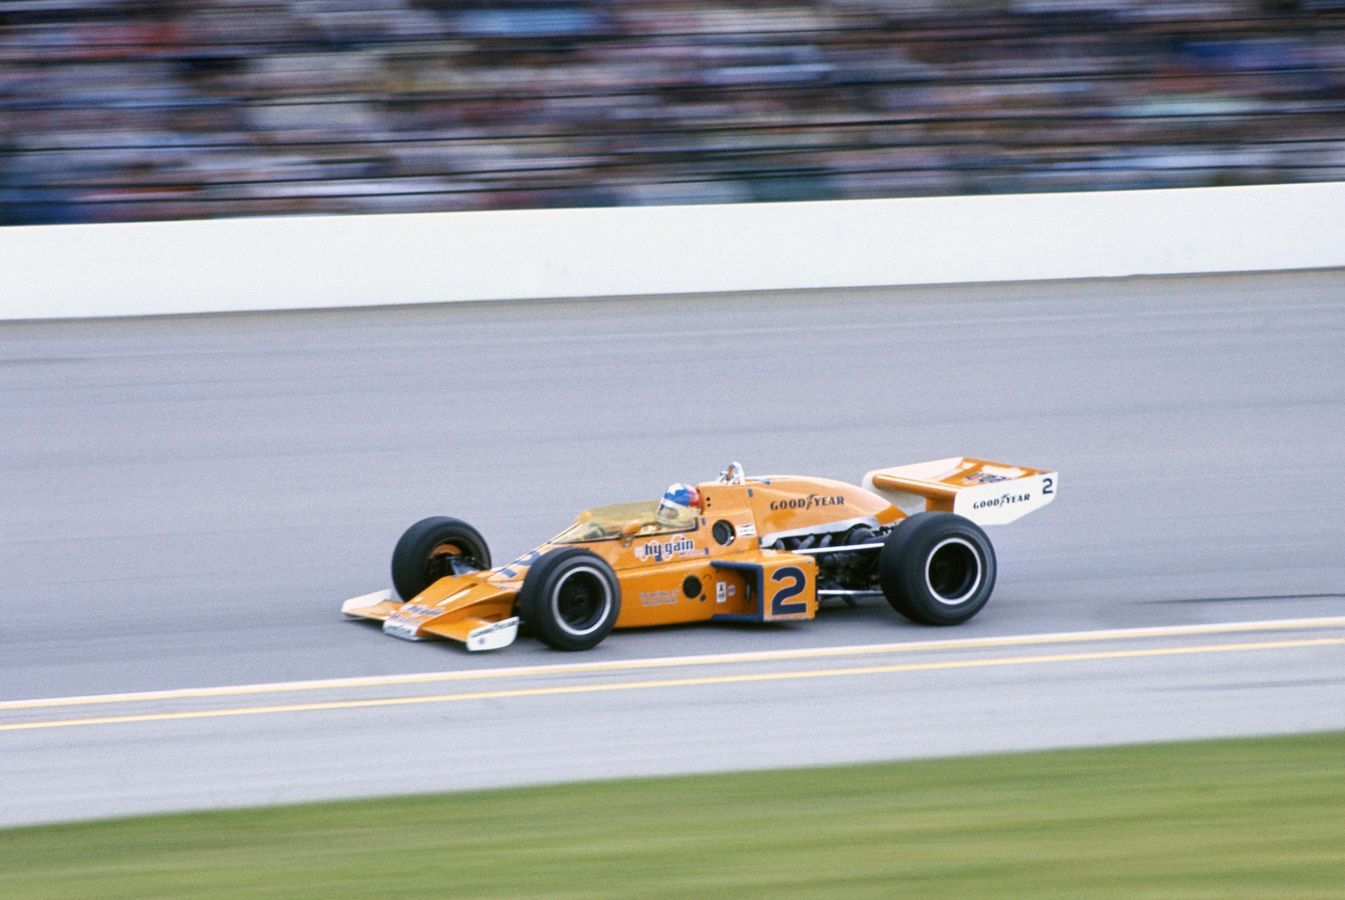 The winning M16 during the 1976 Indianapolis 500 